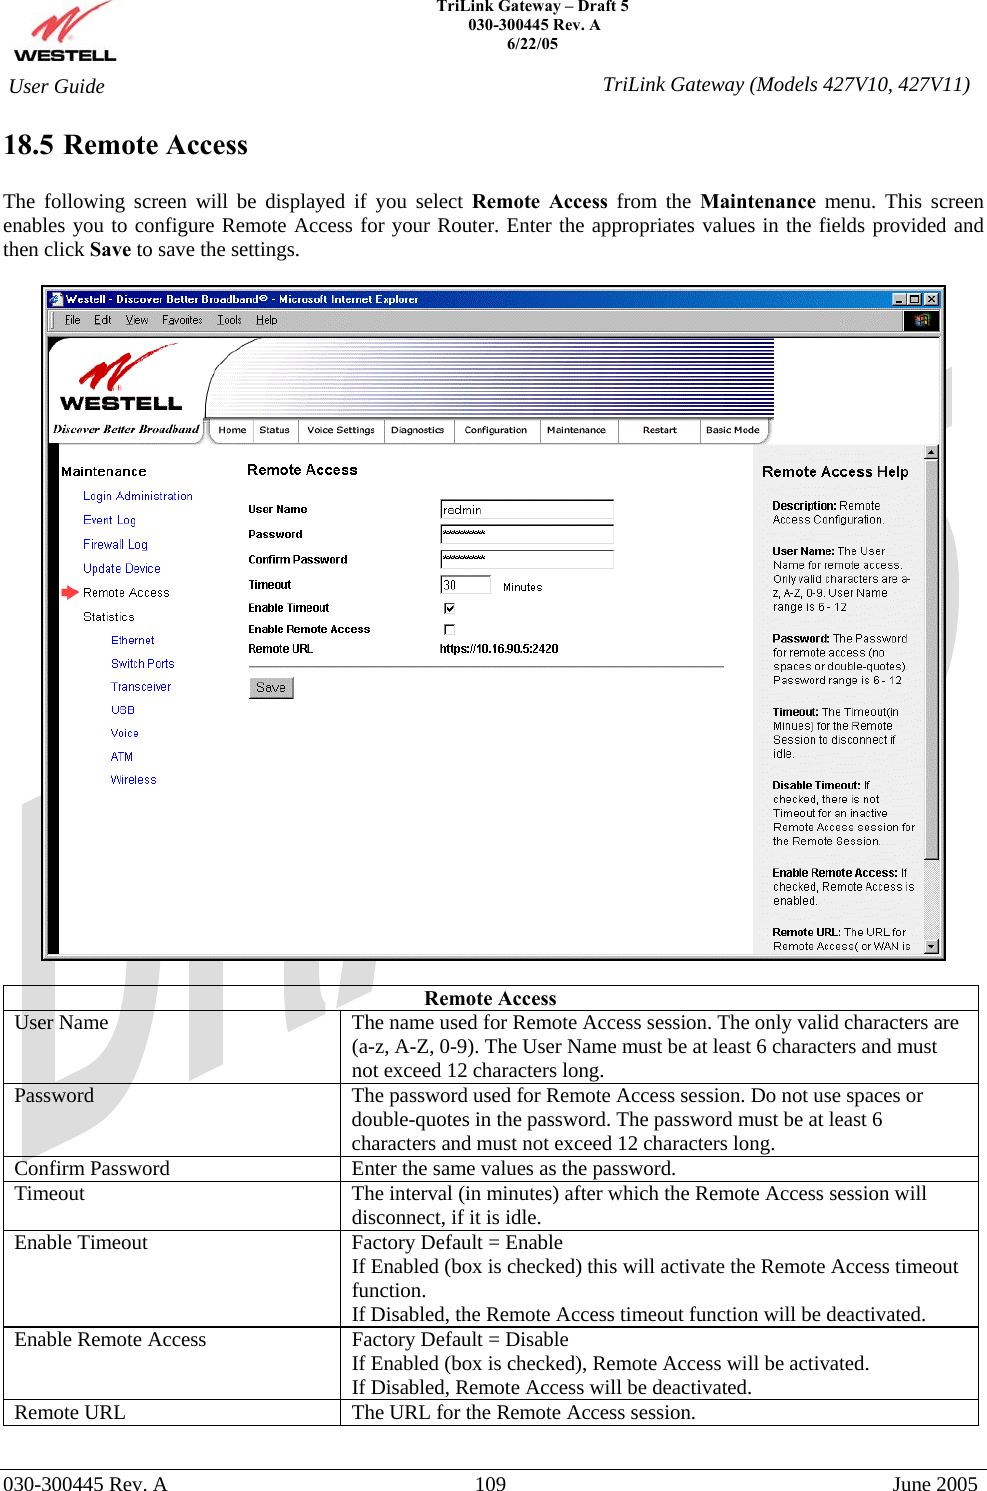    TriLink Gateway – Draft 5   030-300445 Rev. A 6/22/05   030-300445 Rev. A  109  June 2005  User Guide  TriLink Gateway (Models 427V10, 427V11)18.5 Remote Access  The following screen will be displayed if you select Remote Access from the Maintenance menu. This screen enables you to configure Remote Access for your Router. Enter the appropriates values in the fields provided and then click Save to save the settings.     Remote Access User Name  The name used for Remote Access session. The only valid characters are (a-z, A-Z, 0-9). The User Name must be at least 6 characters and must not exceed 12 characters long. Password  The password used for Remote Access session. Do not use spaces or double-quotes in the password. The password must be at least 6 characters and must not exceed 12 characters long. Confirm Password  Enter the same values as the password. Timeout  The interval (in minutes) after which the Remote Access session will disconnect, if it is idle. Enable Timeout  Factory Default = Enable If Enabled (box is checked) this will activate the Remote Access timeout function.  If Disabled, the Remote Access timeout function will be deactivated. Enable Remote Access  Factory Default = Disable If Enabled (box is checked), Remote Access will be activated. If Disabled, Remote Access will be deactivated. Remote URL  The URL for the Remote Access session. 